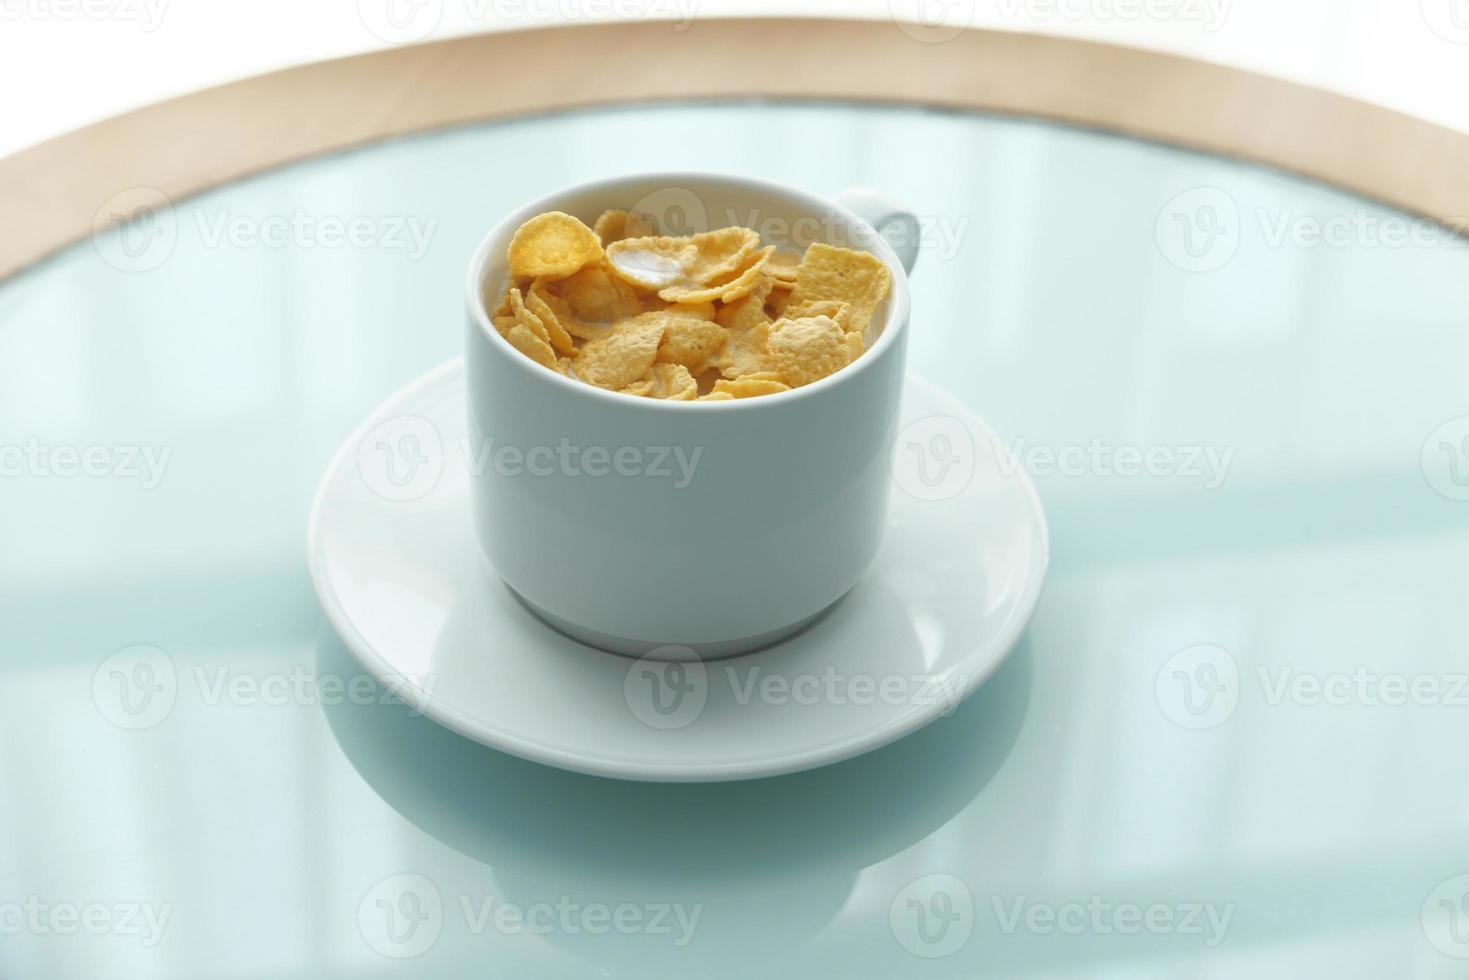 Corn flakes in a bowl on table photo